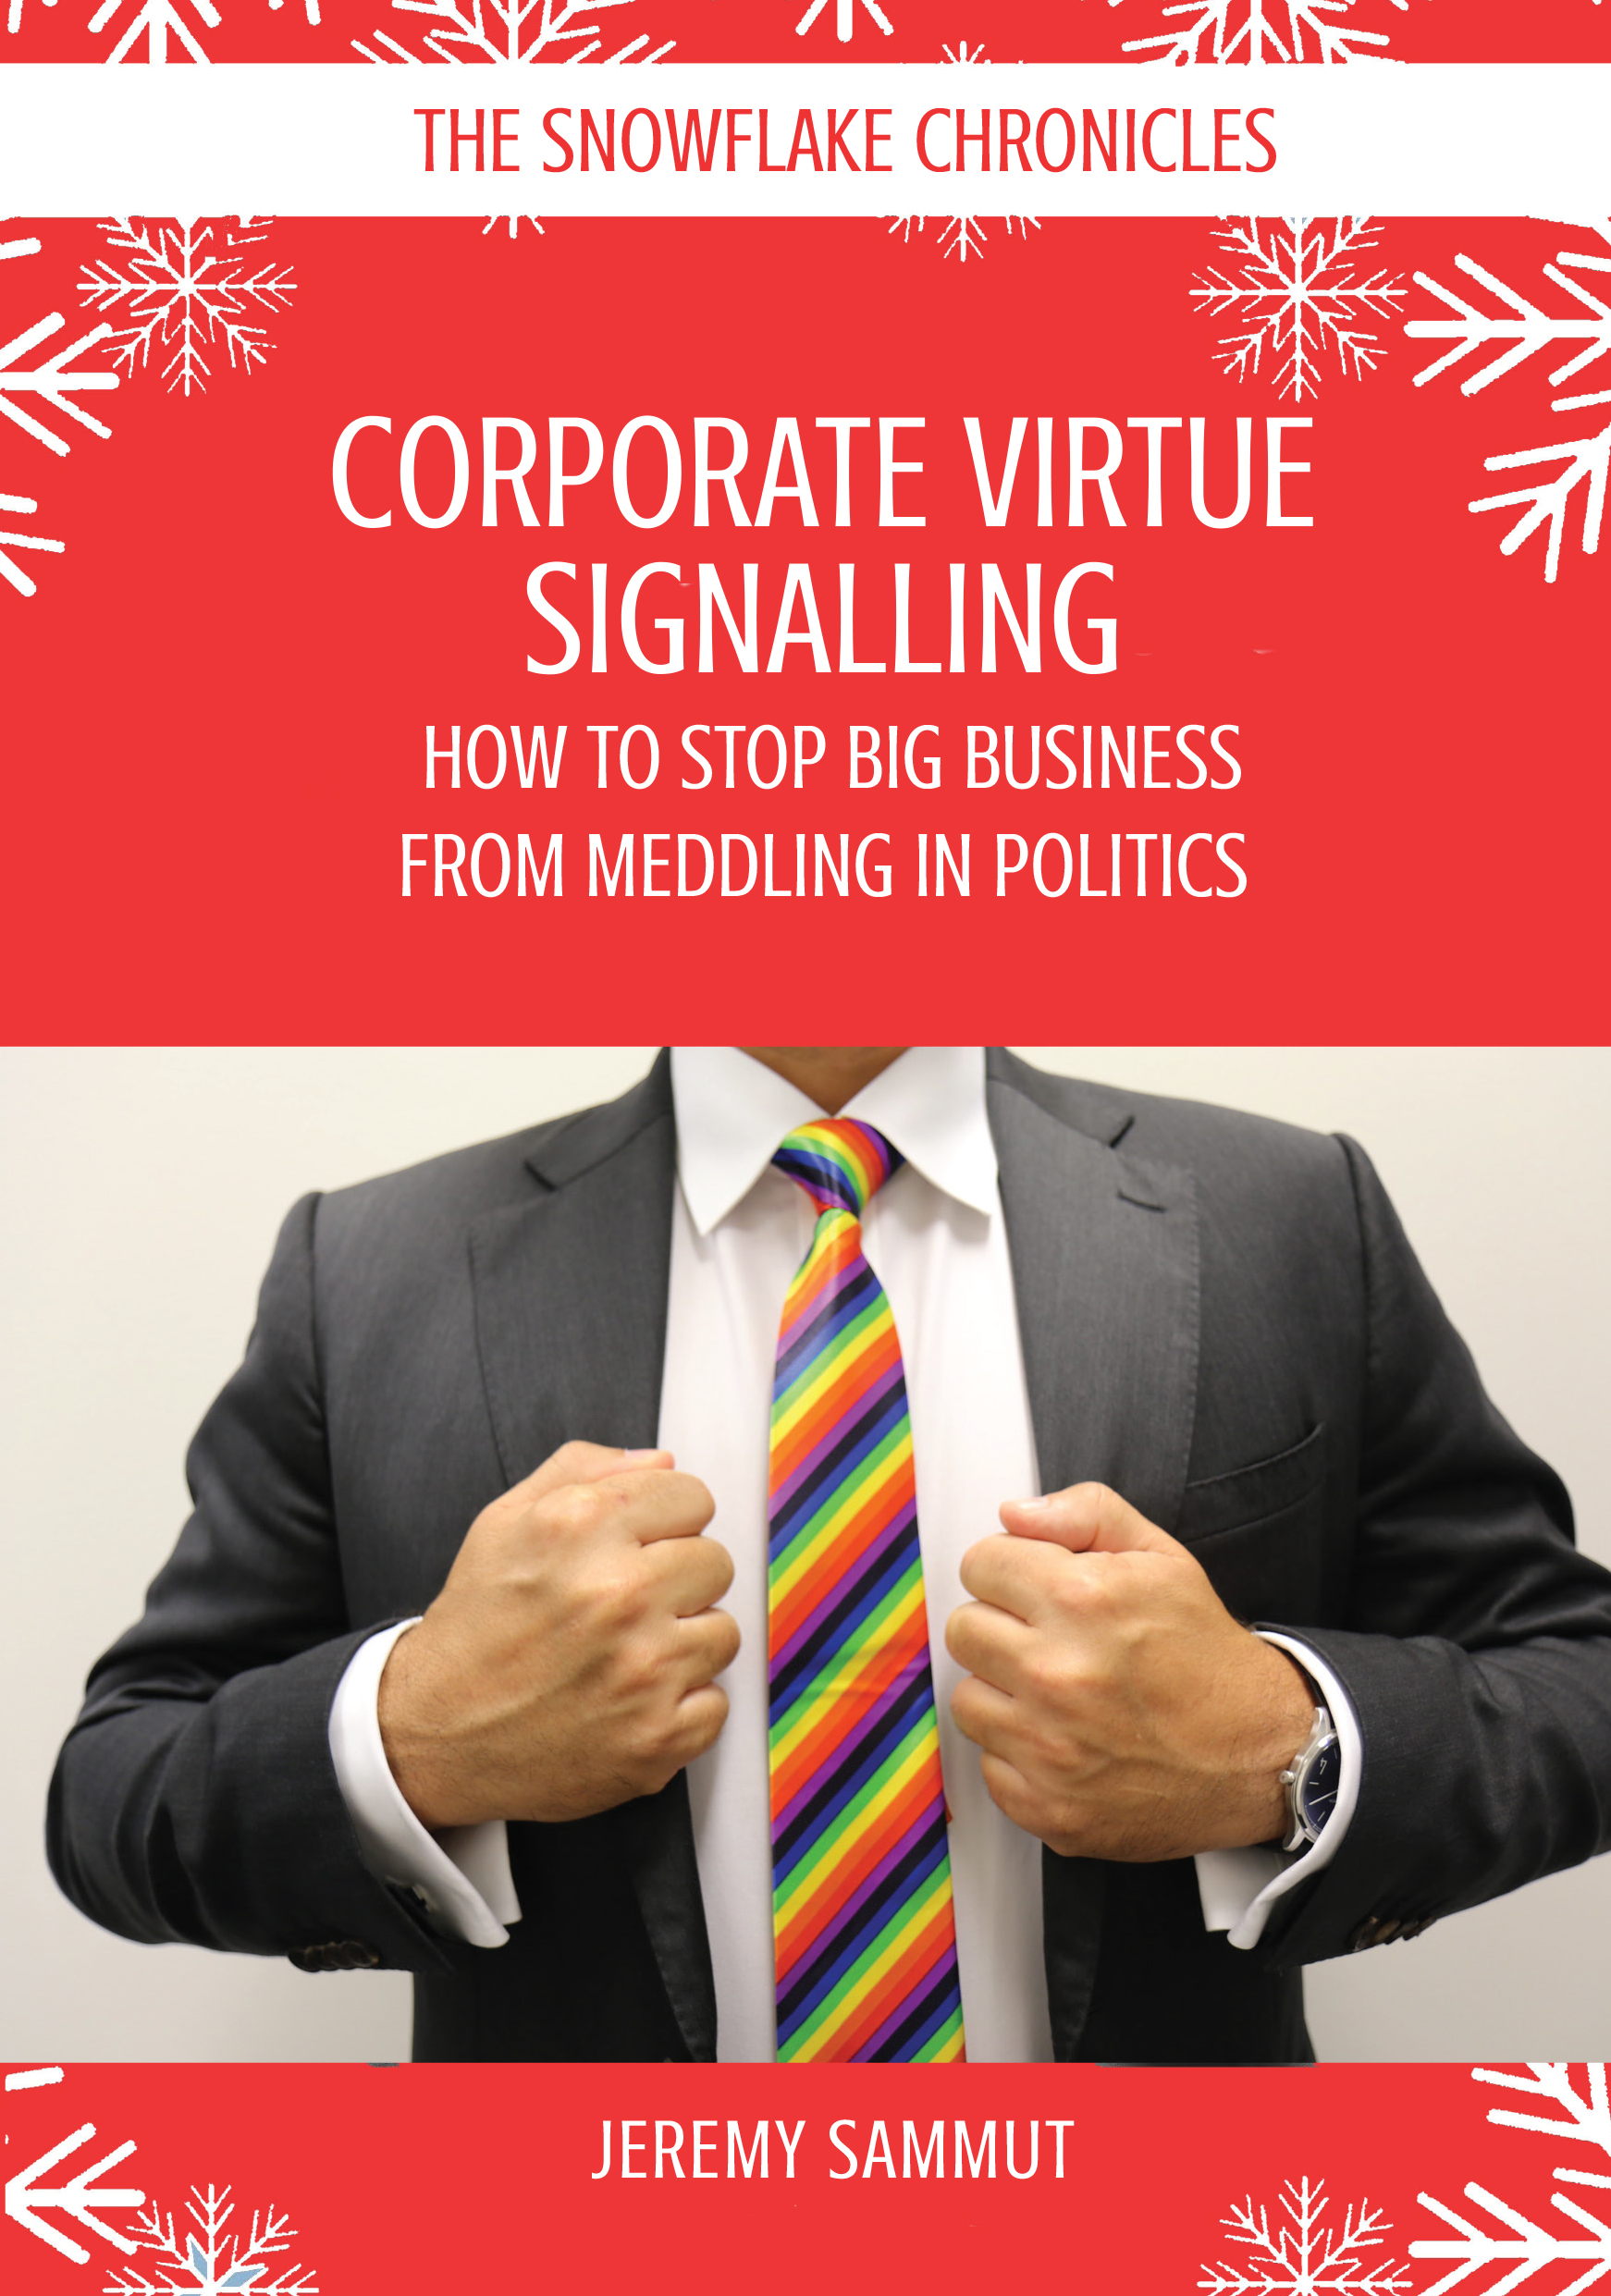 Corporate Virtue Signalling: How to Stop Big Business from Meddling in Politics